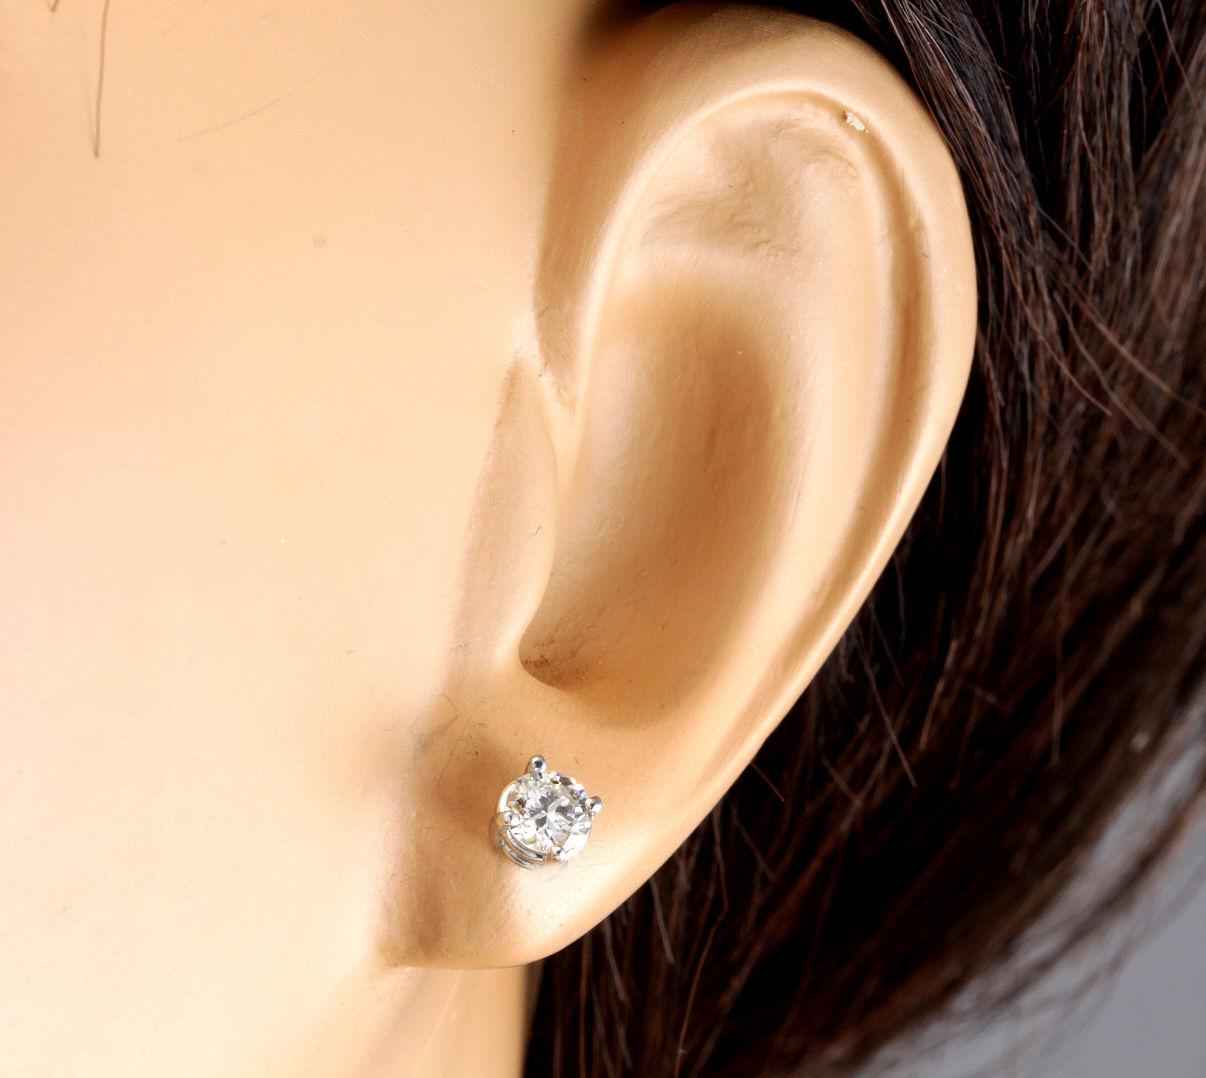 Women's Exquisite 1.60 Carat Natural Diamond 14 Karat Solid White Gold Stud Earrings For Sale